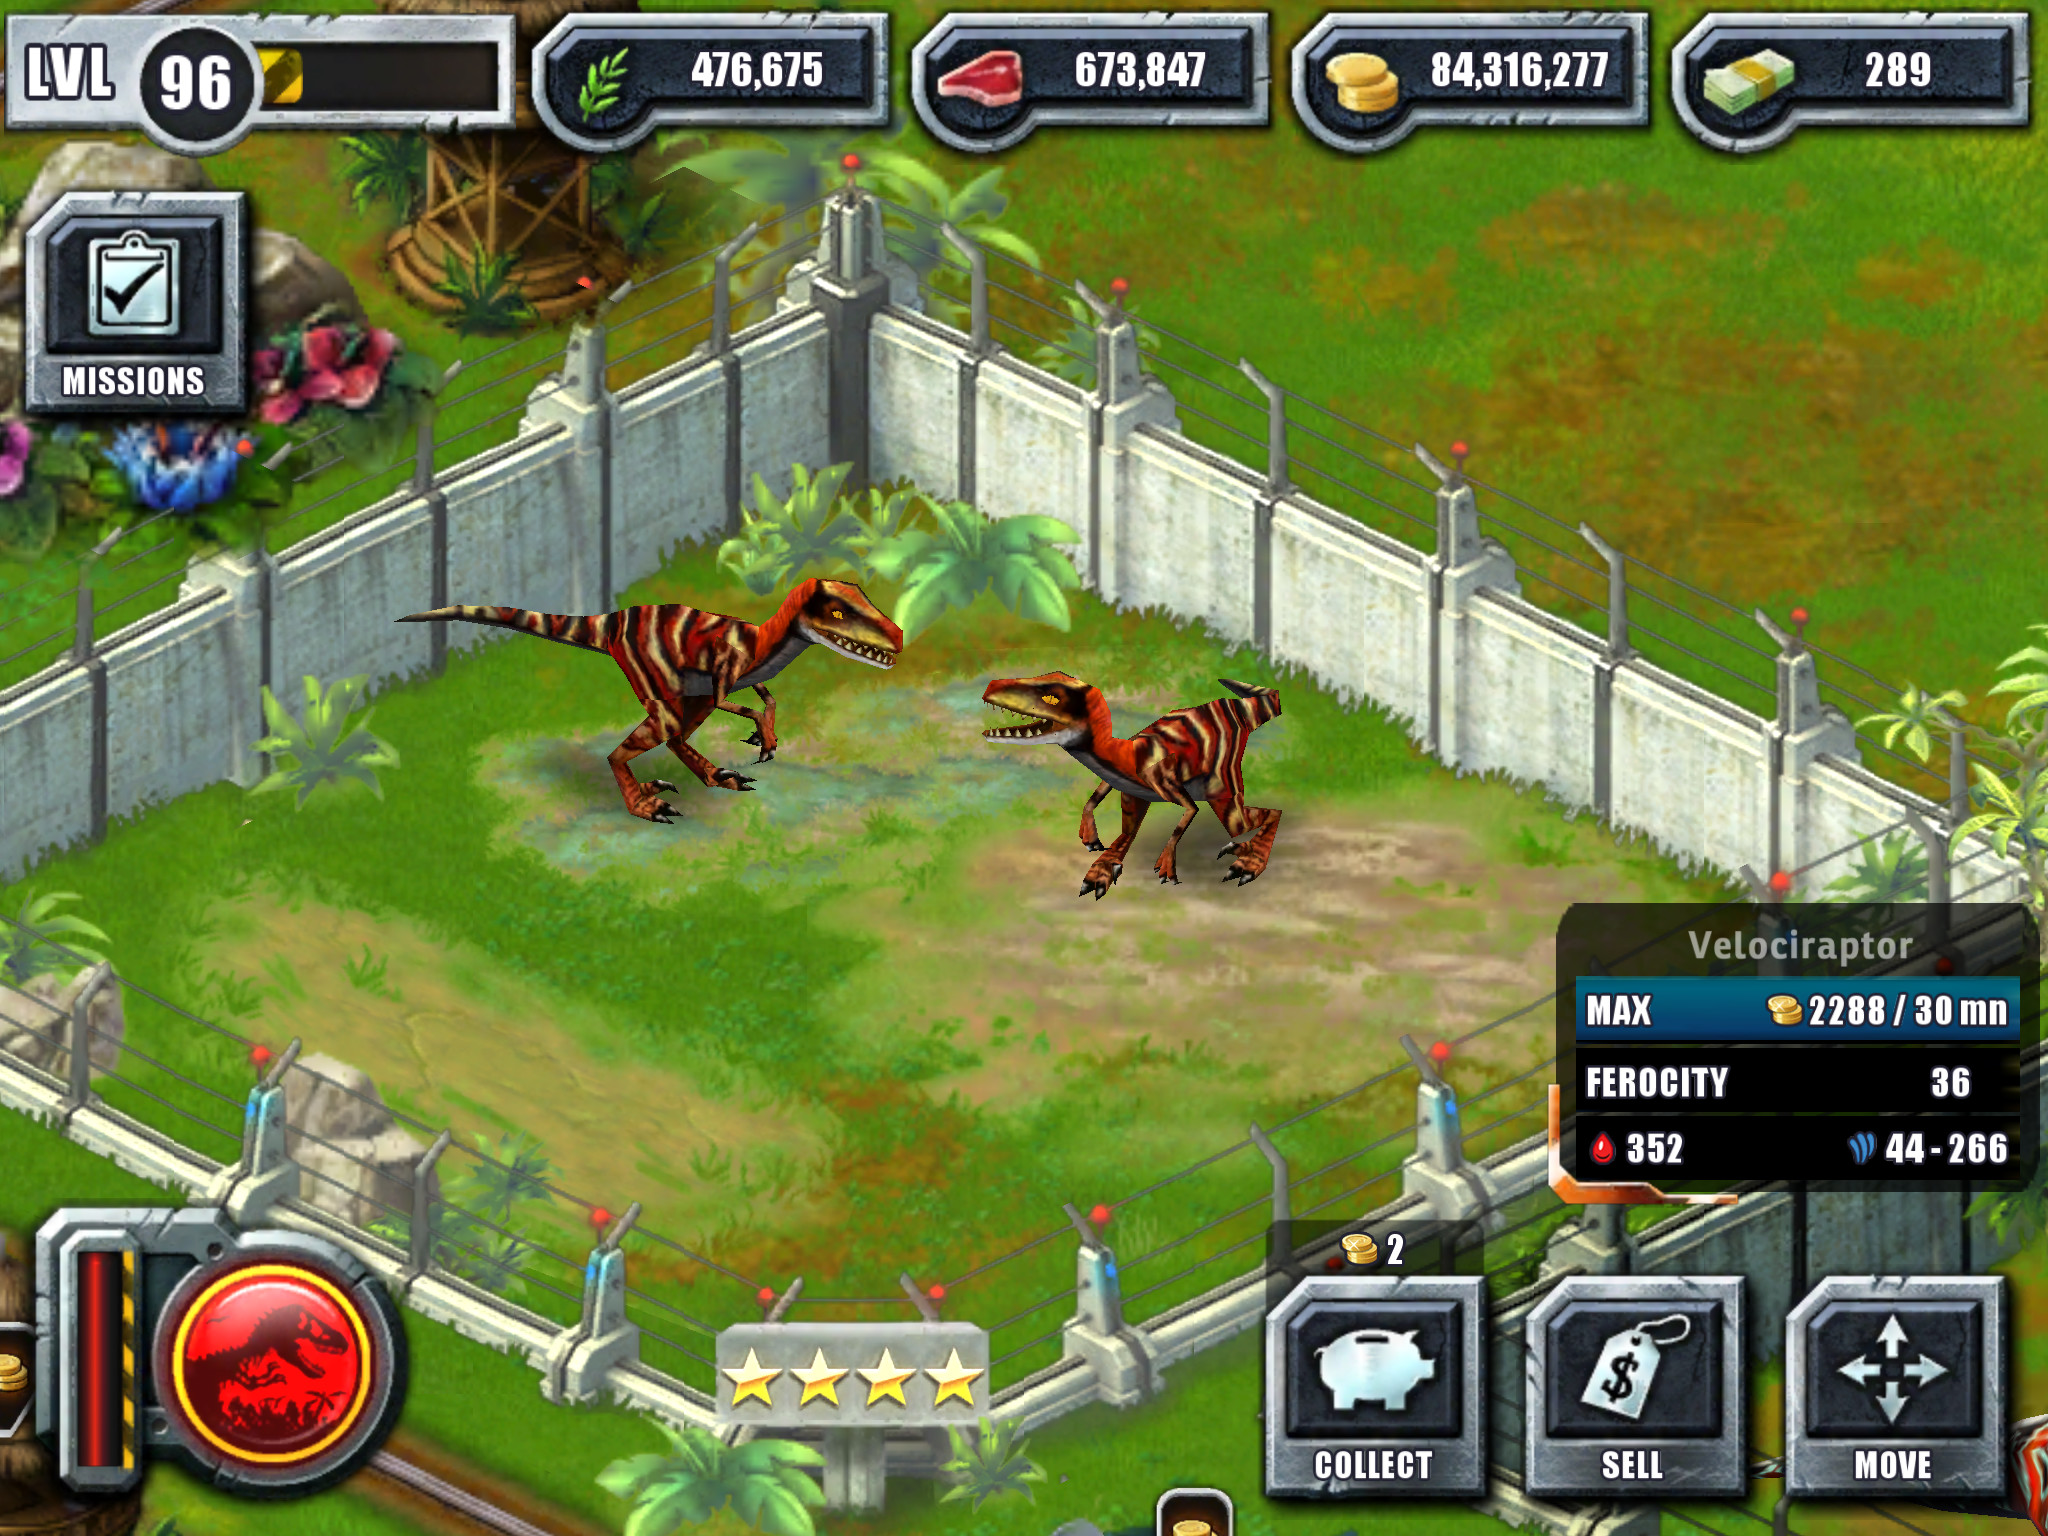 2048x1536 Jurassic Park Builder Hack Tools - No Verification - Unlimited Bucks,  Coins, Meat and Herbs (Android/Ios) Jurassic Park Builder Hack and Cheats  Jurassic ...